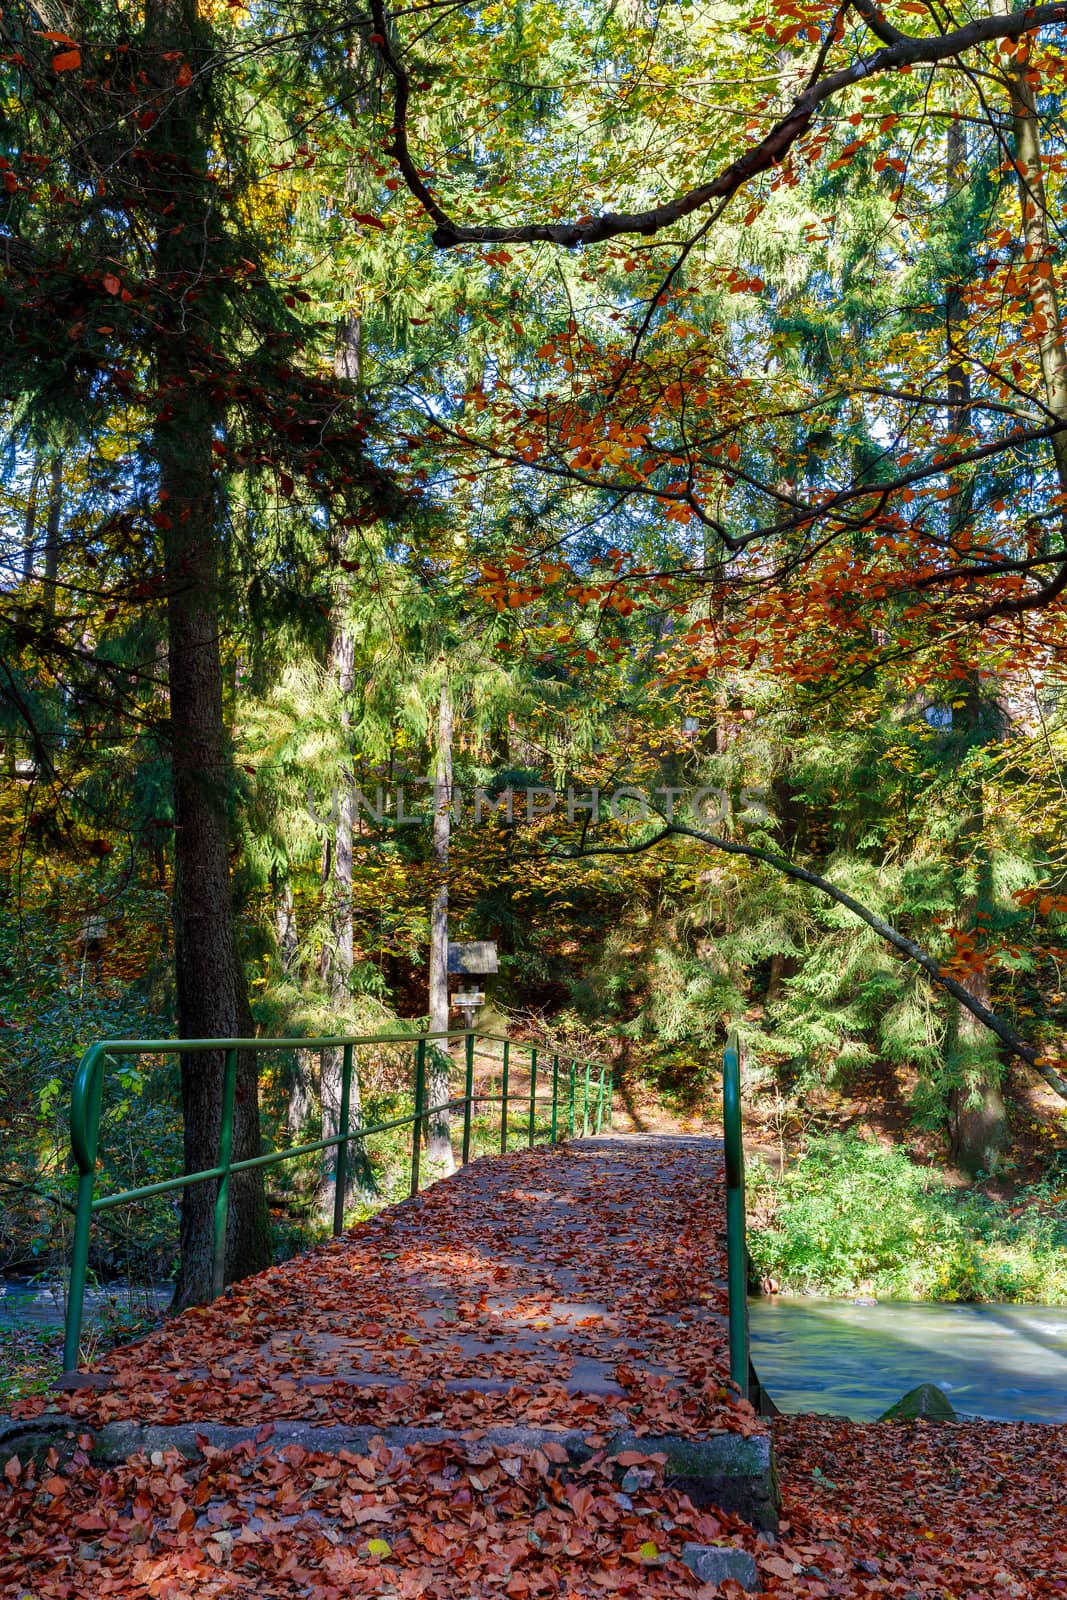 Autumn in park, landscape with fall colored trees and blue sky in sunny day, pathway in forest